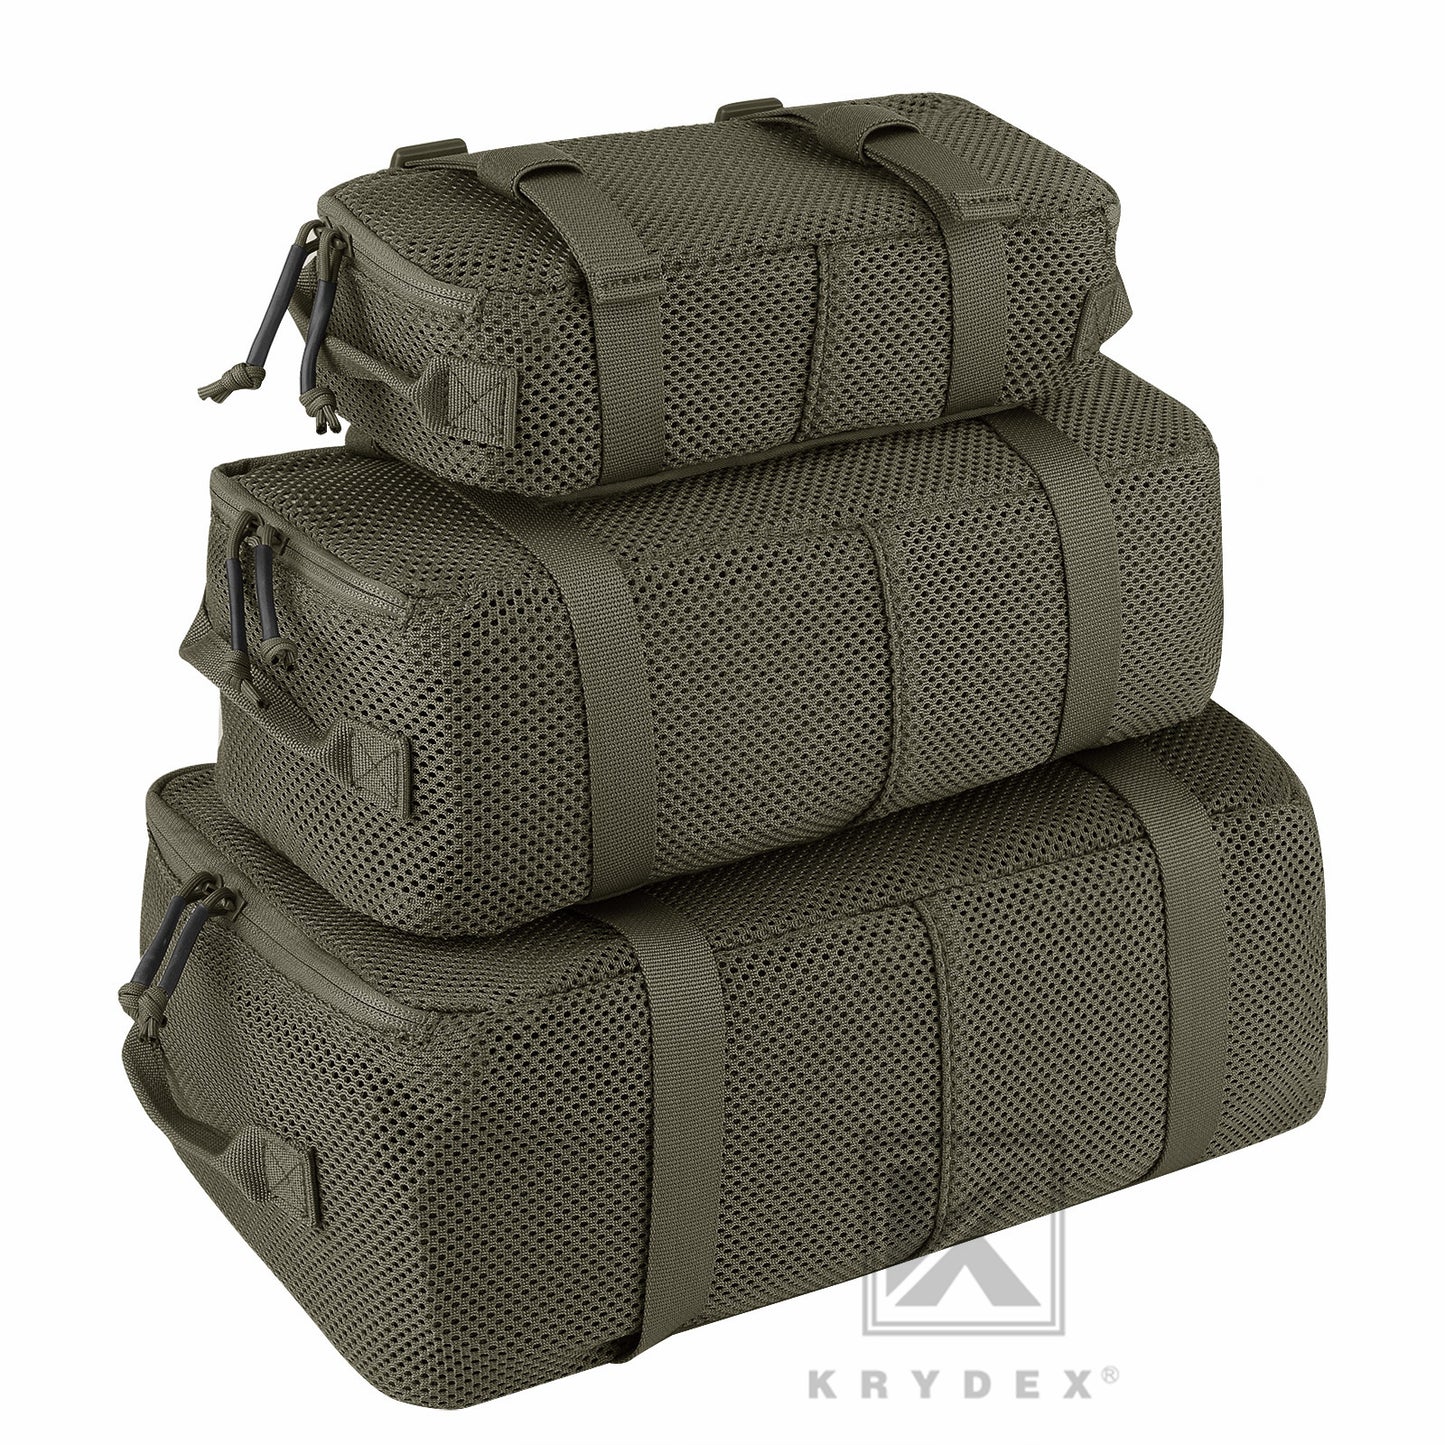 KRYDEX Tactical Modular Pouch Set Outdoor Backpack Organizer Travel Suitcase Packing Cubes